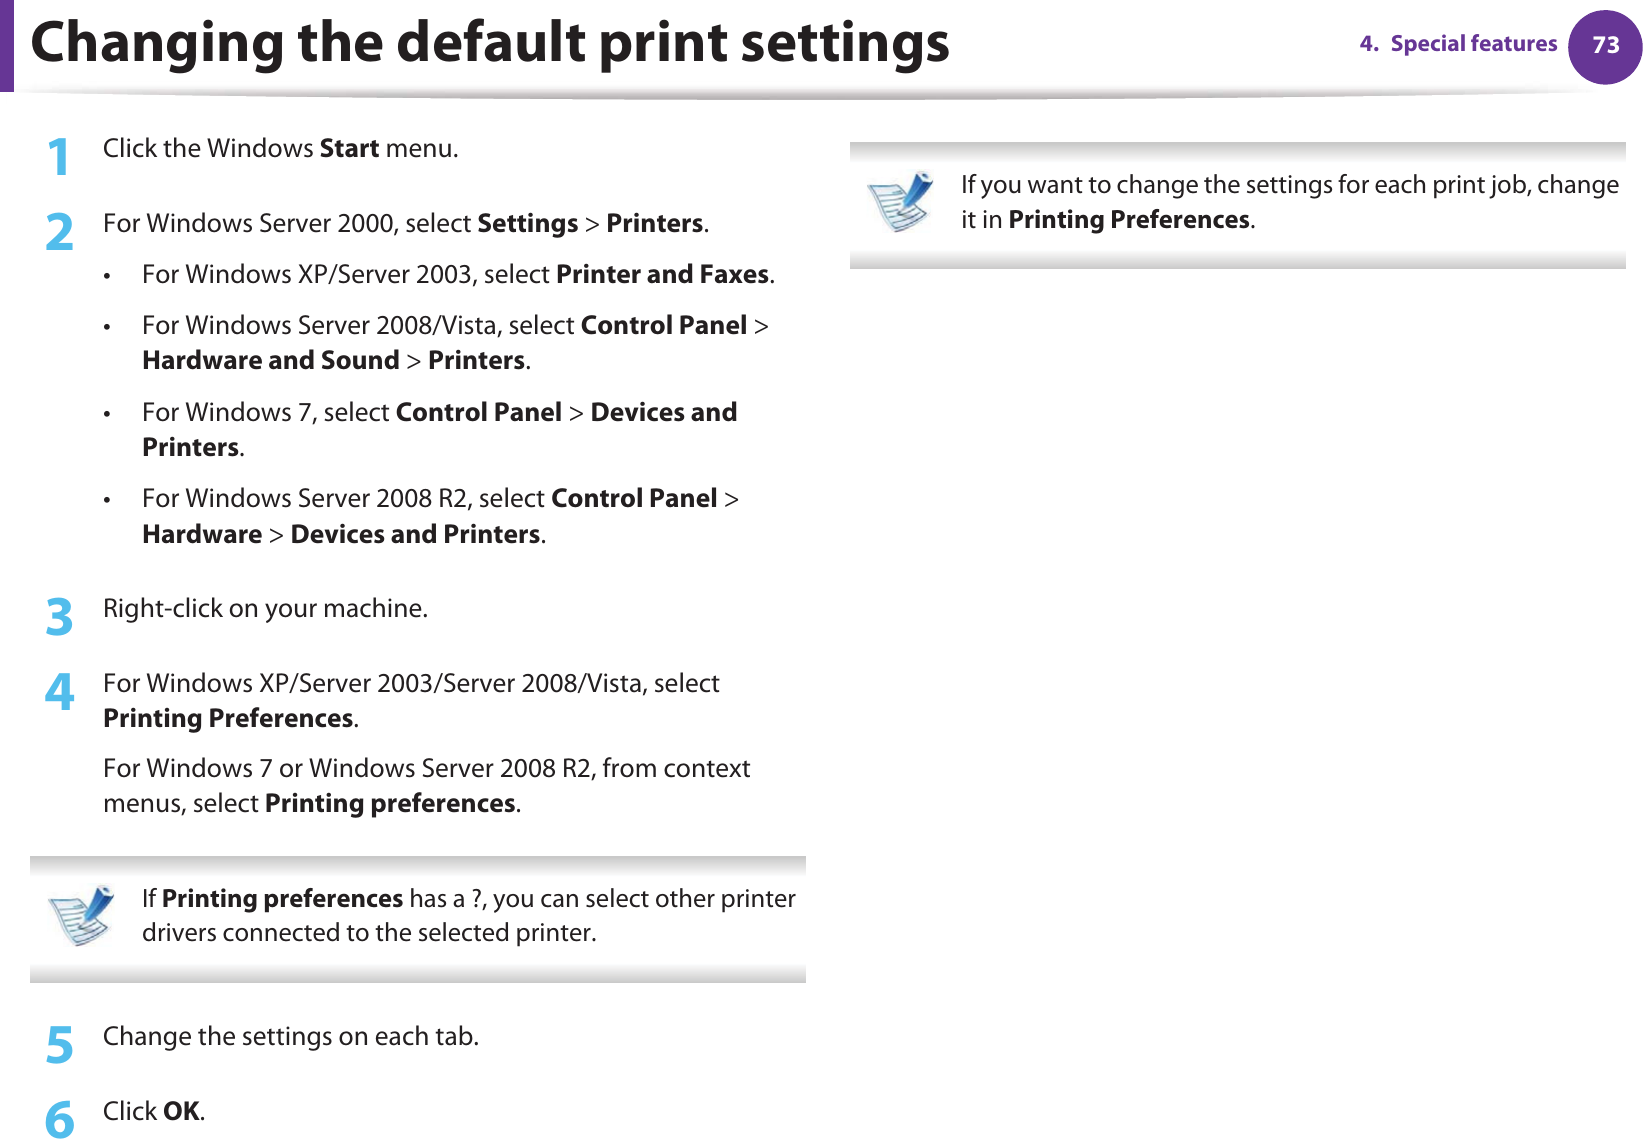 734. Special featuresChanging the default print settings1Click the Windows Start menu. 2  For Windows Server 2000, select Settings &gt; Printers.• For Windows XP/Server 2003, select Printer and Faxes. • For Windows Server 2008/Vista, select Control Panel &gt; Hardware and Sound &gt; Printers. • For Windows 7, select Control Panel &gt; Devices and Printers. • For Windows Server 2008 R2, select Control Panel &gt; Hardware &gt; Devices and Printers. 3  Right-click on your machine.4  For Windows XP/Server 2003/Server 2008/Vista, select Printing Preferences.For Windows 7 or Windows Server 2008 R2, from context menus, select Printing preferences. If Printing preferences has a ?, you can select other printer drivers connected to the selected printer. 5  Change the settings on each tab. 6  Click OK. If you want to change the settings for each print job, change it in Printing Preferences.  